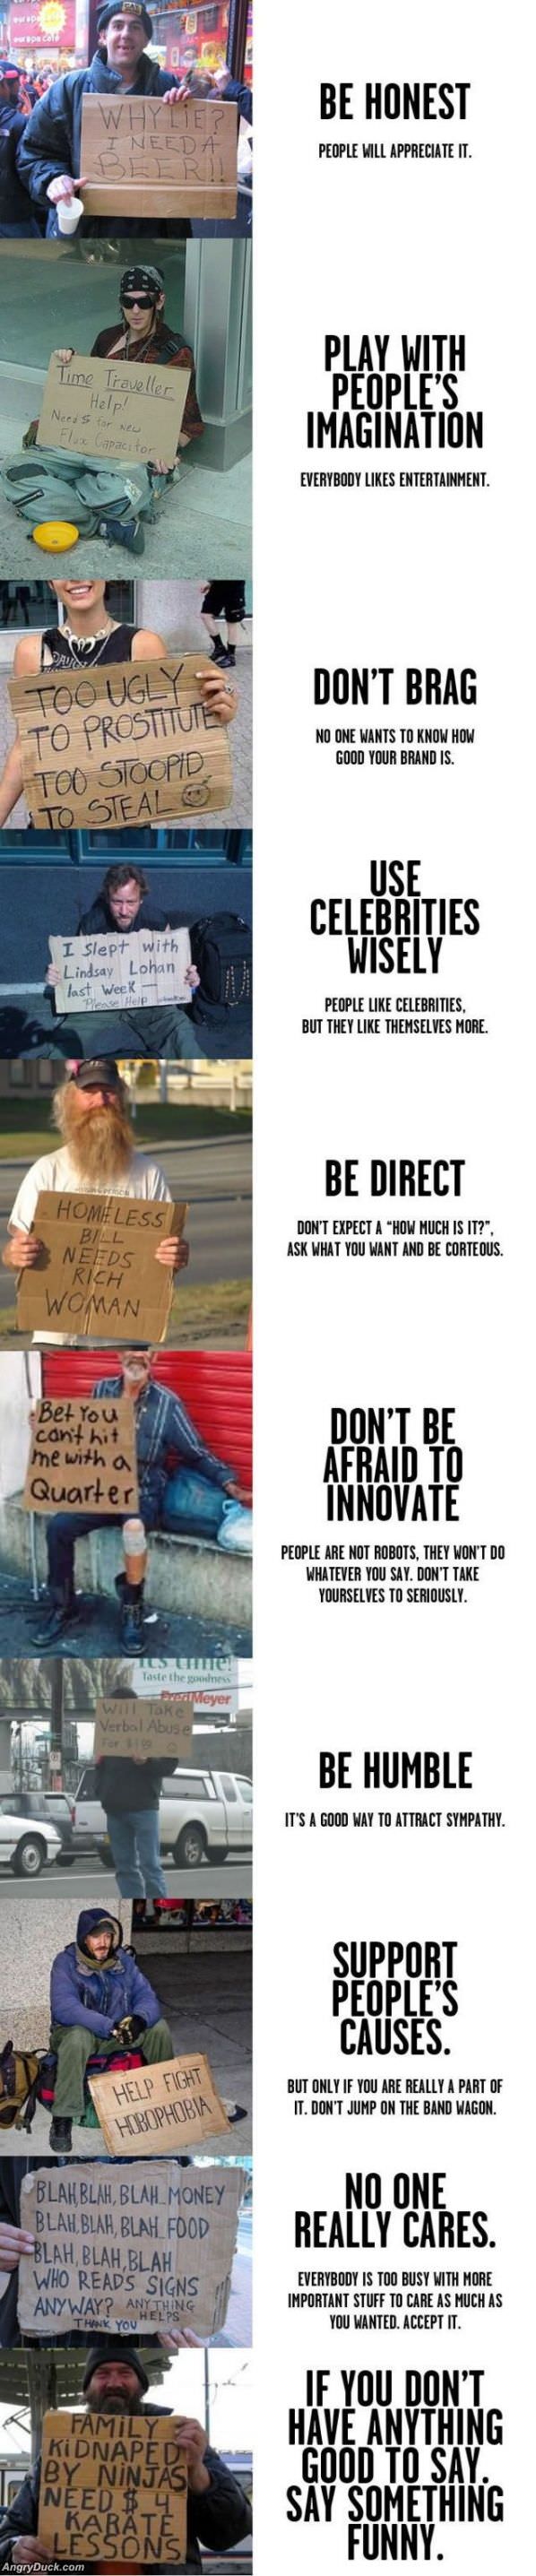 Homeless Signs